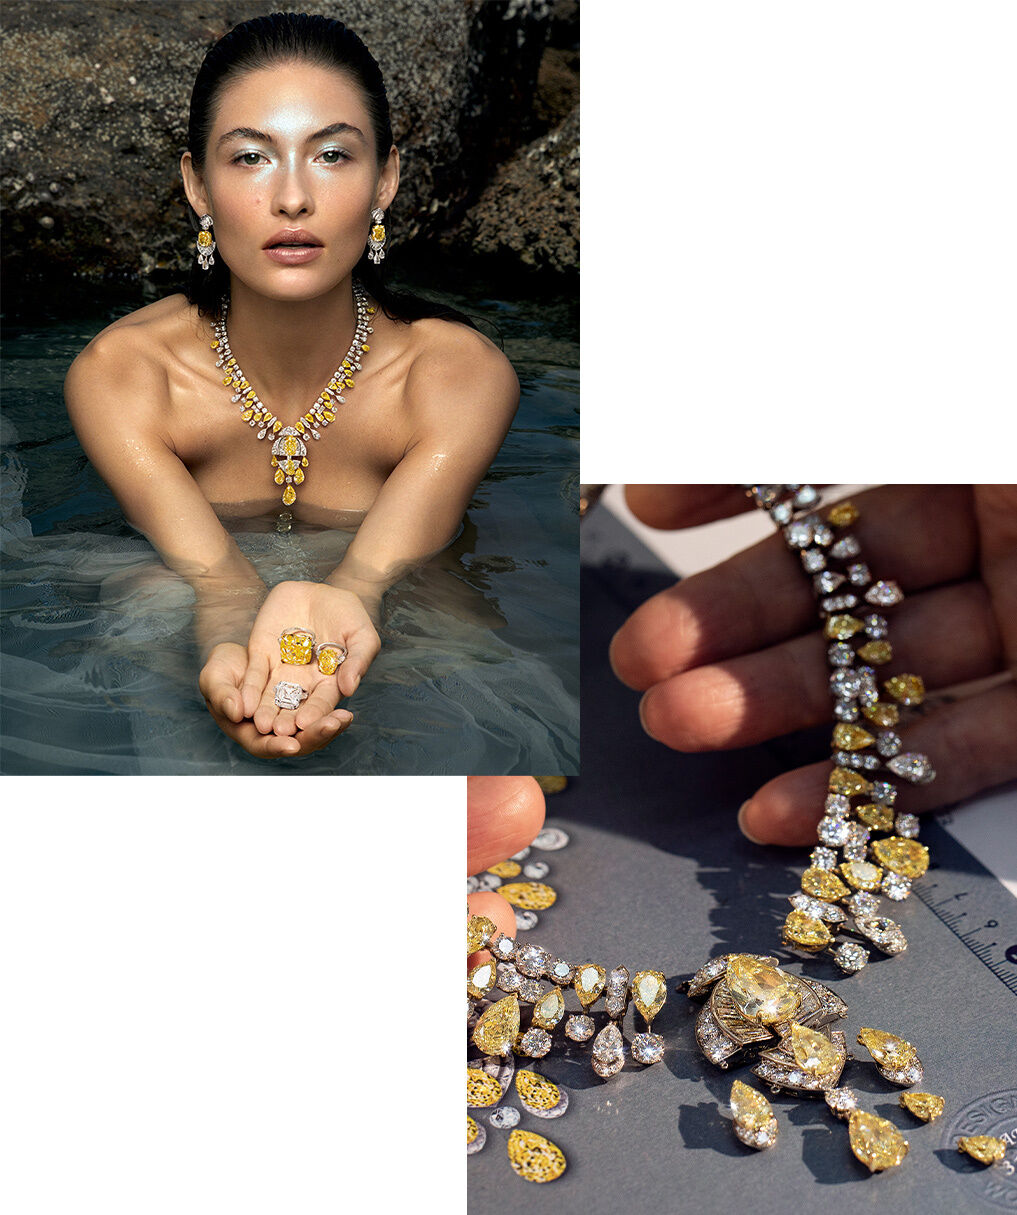 Model wearing yellow diamond high jewellery and image of necklace design